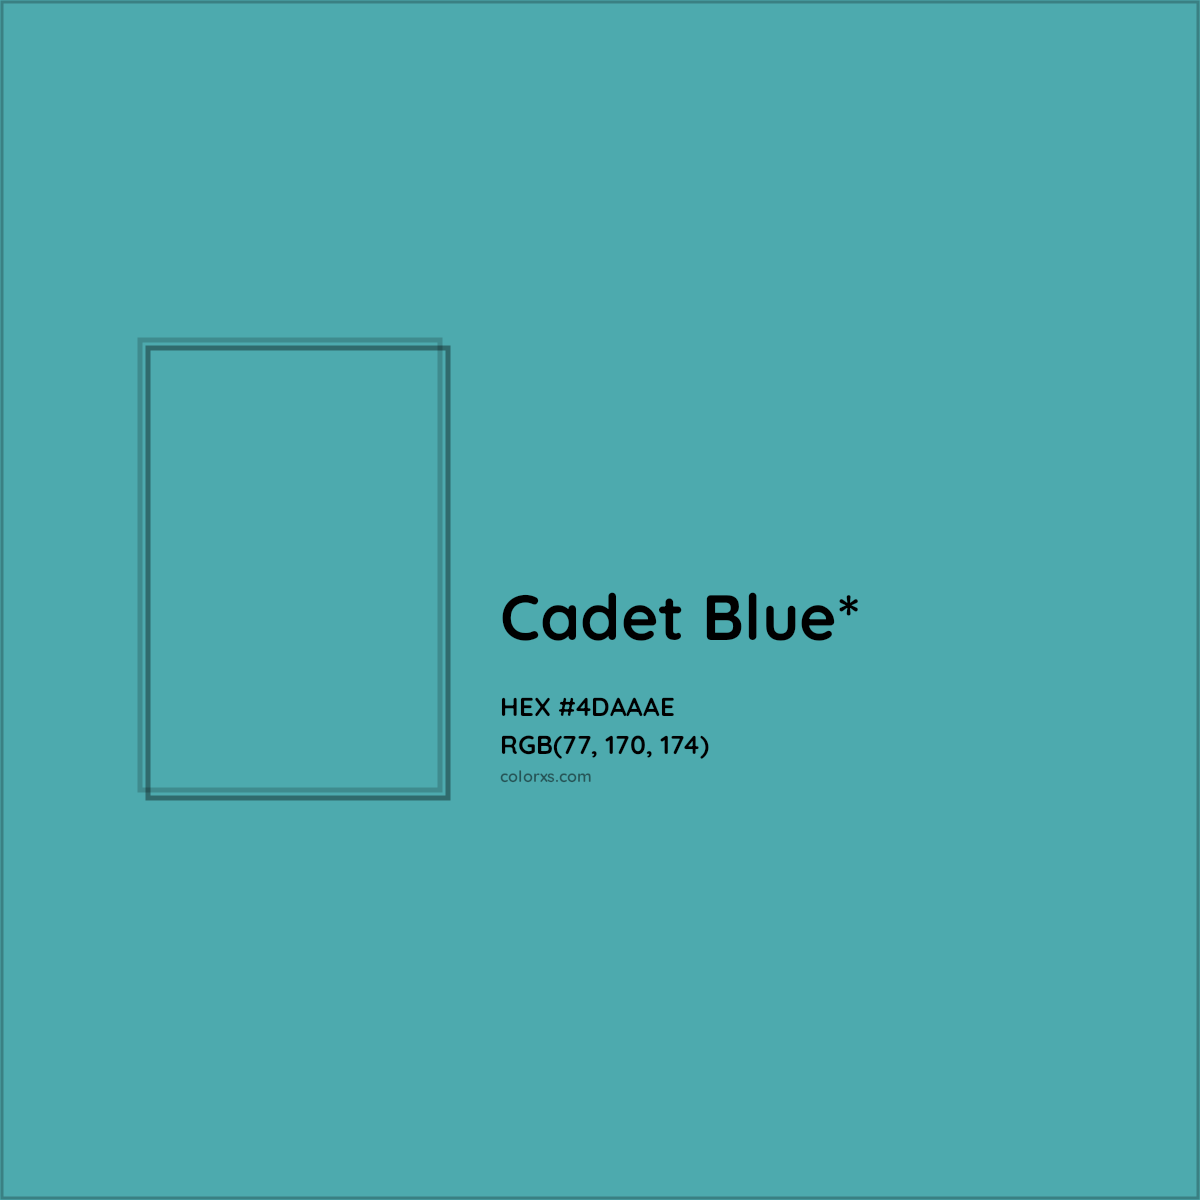 HEX #4DAAAE Color Name, Color Code, Palettes, Similar Paints, Images